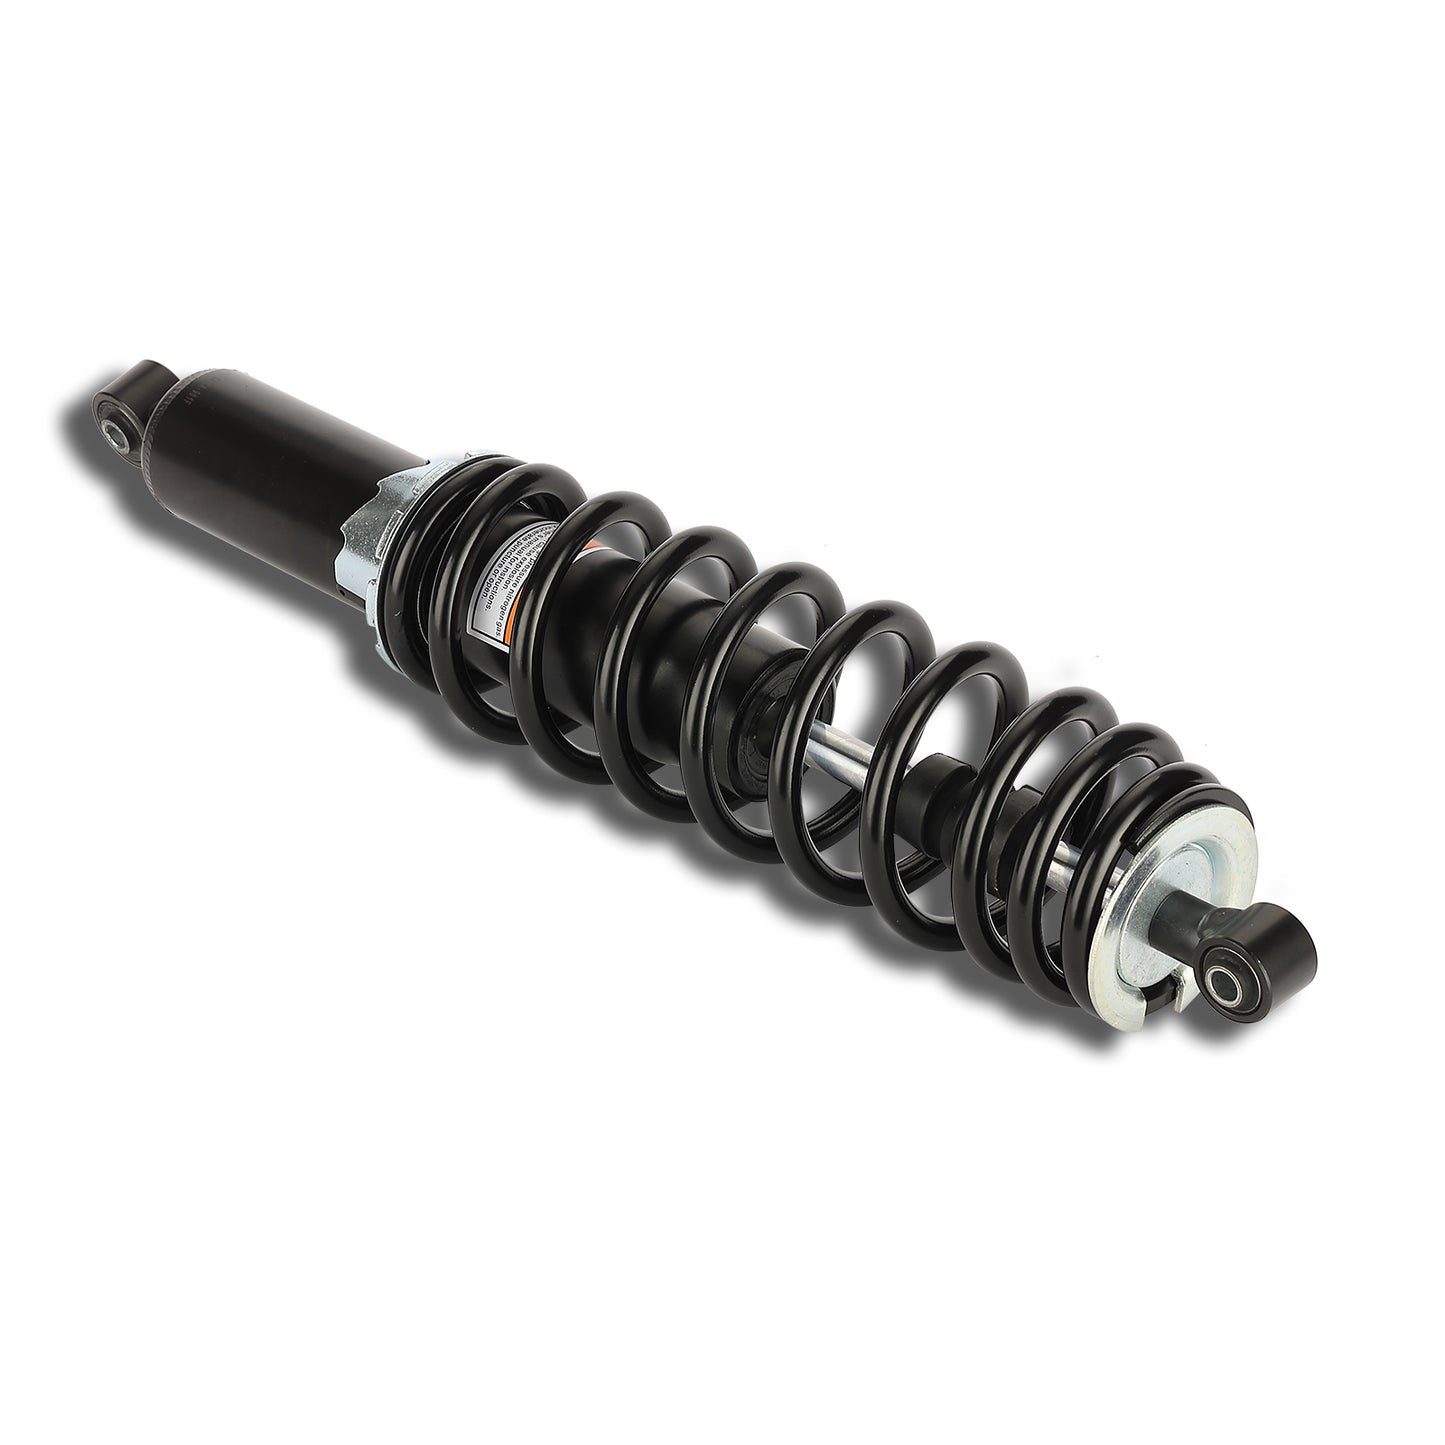 CAM-CA901 ATV Front Left/Right Shock Absorber Replacement for 2011-2017 Can Am Commander 1000 DPS, XT 800, 800R DPS Front Shock